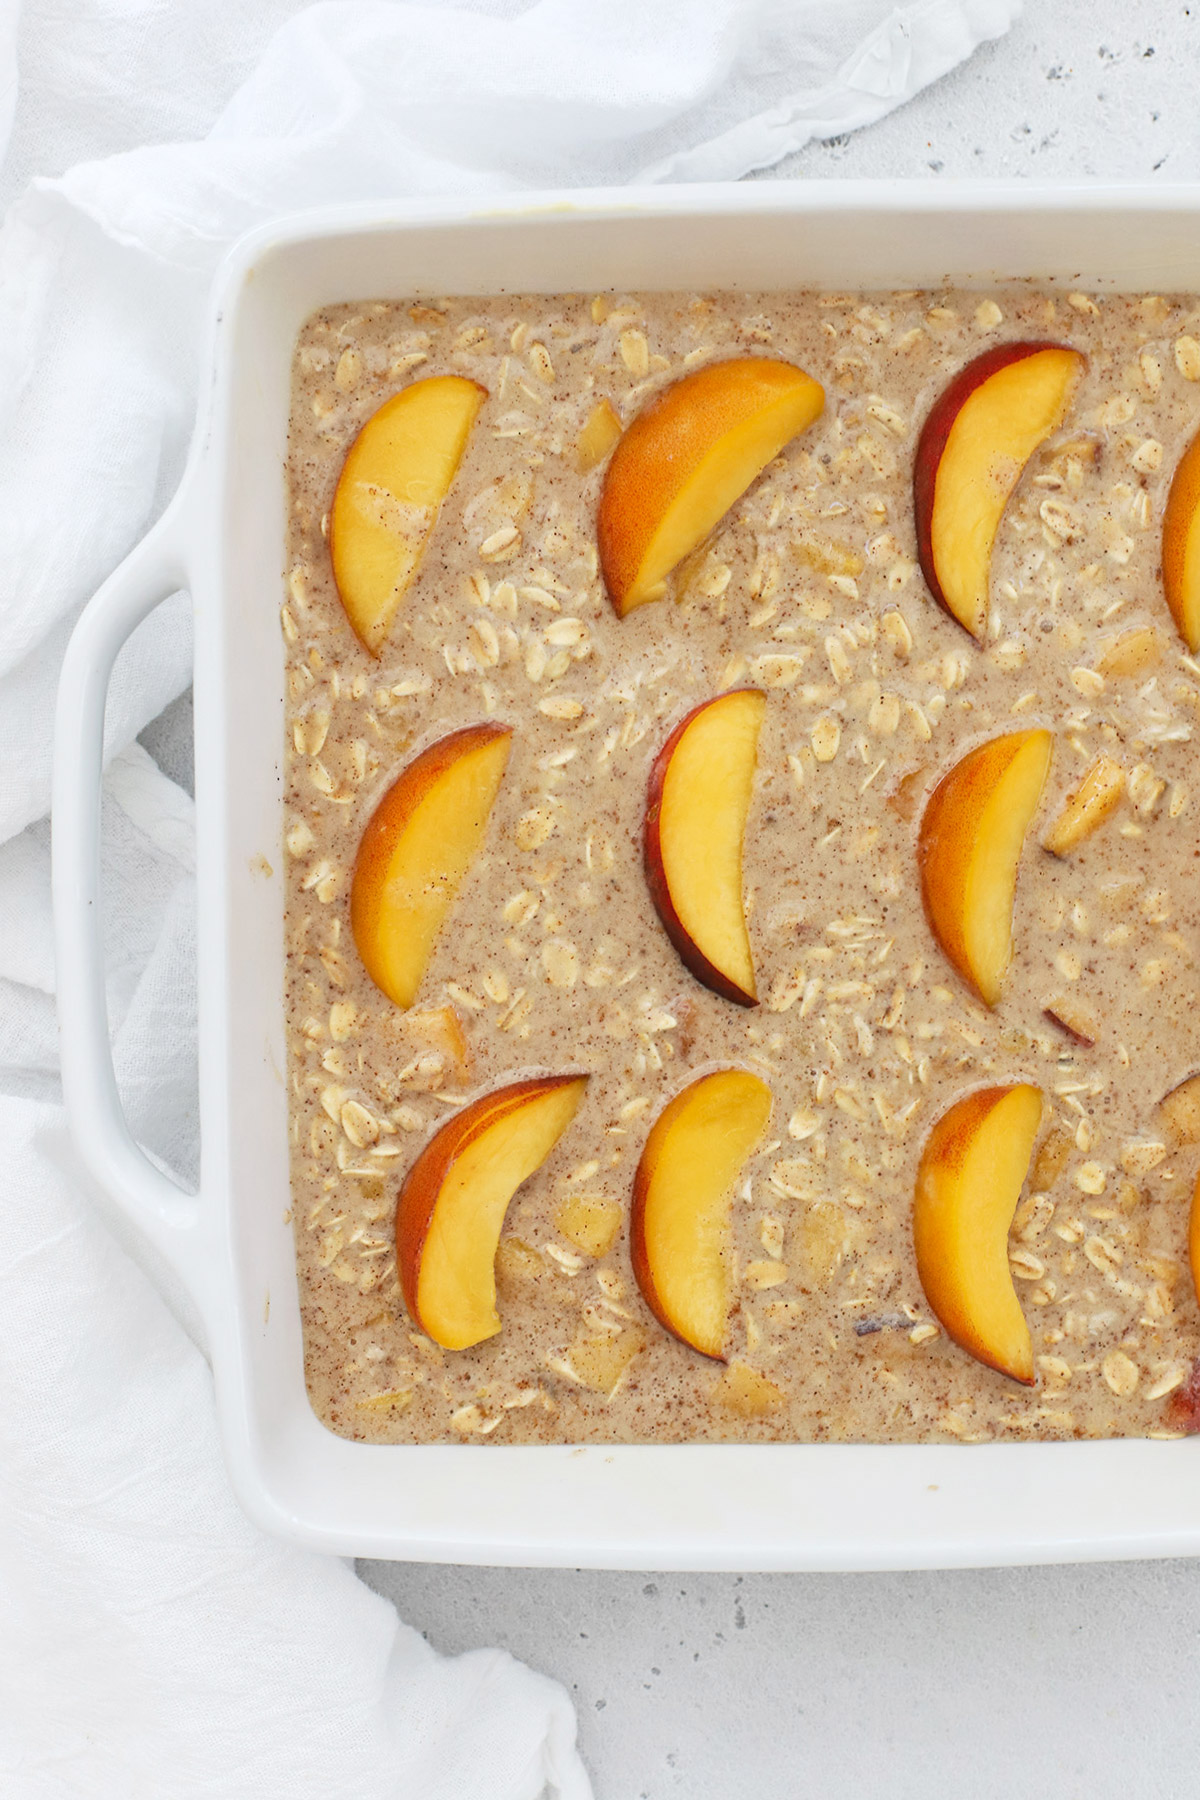 A pan of peach baked oatmeal ready to go into the oven